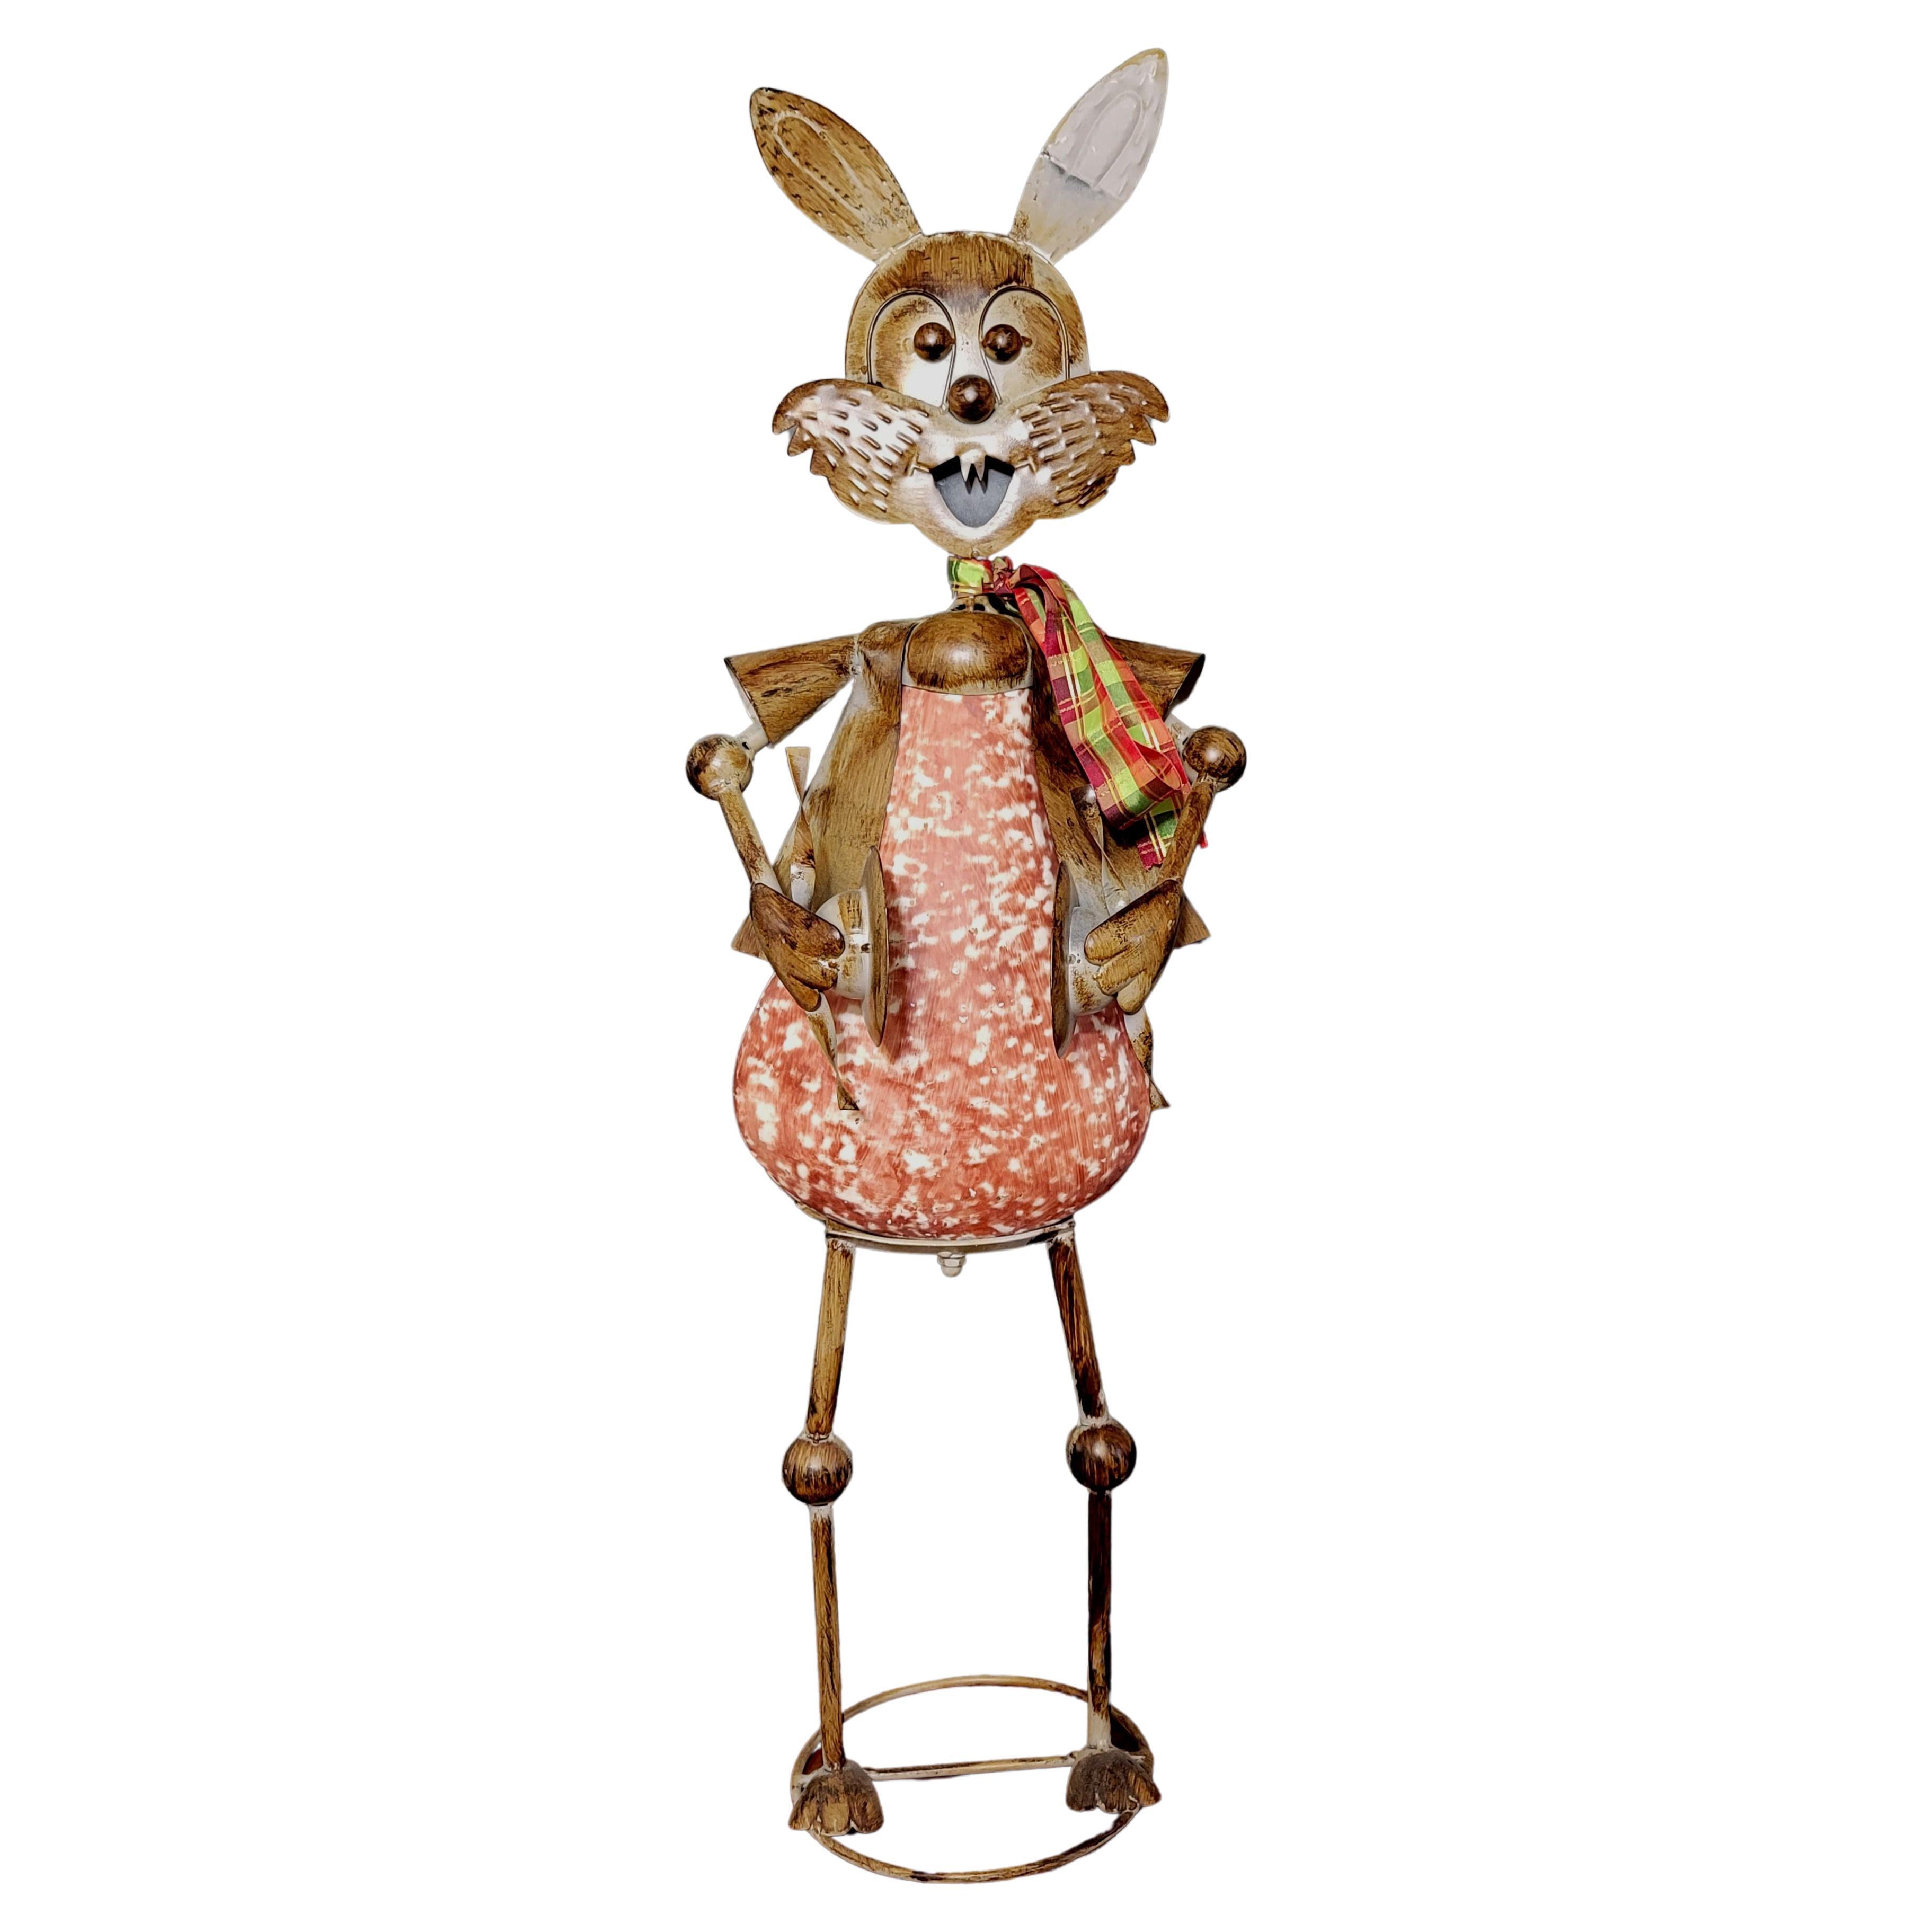 Ventage of Large and Impressive Floor Standing Metal Colored Bunny Decor For Sale